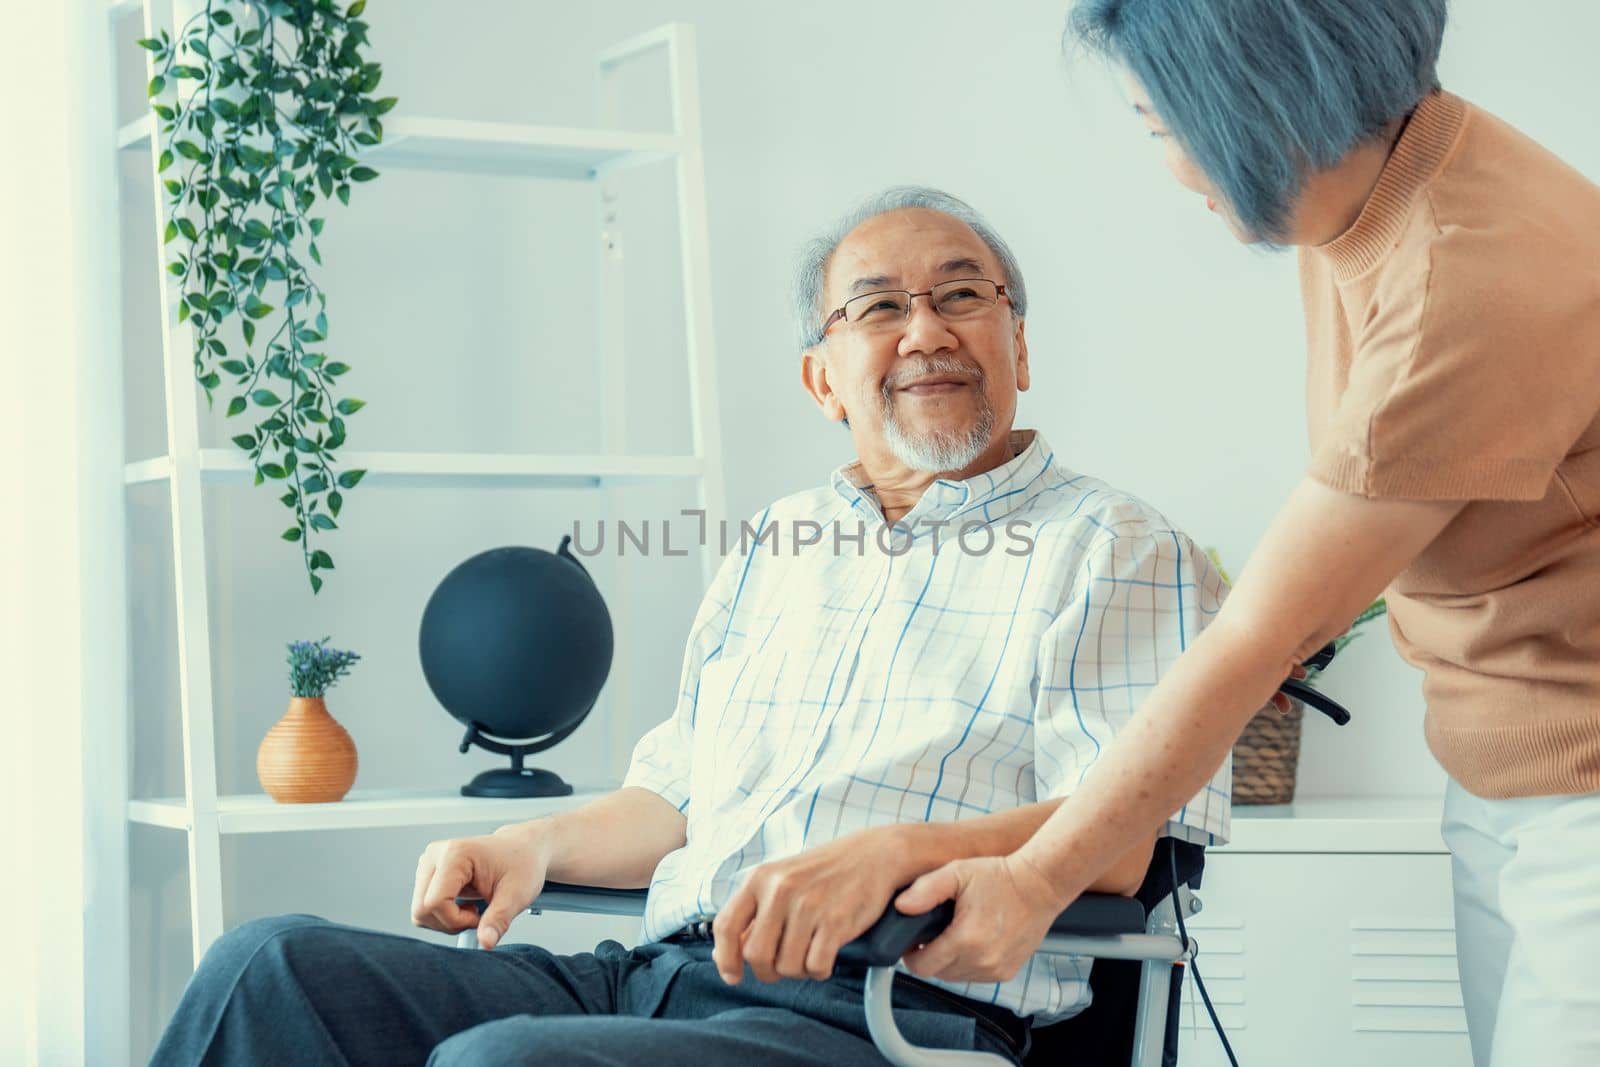 Senior wife giving support to her husband in his wheelchair with love, contented pensioner life. A senior couple is understanding and smiling at each other.